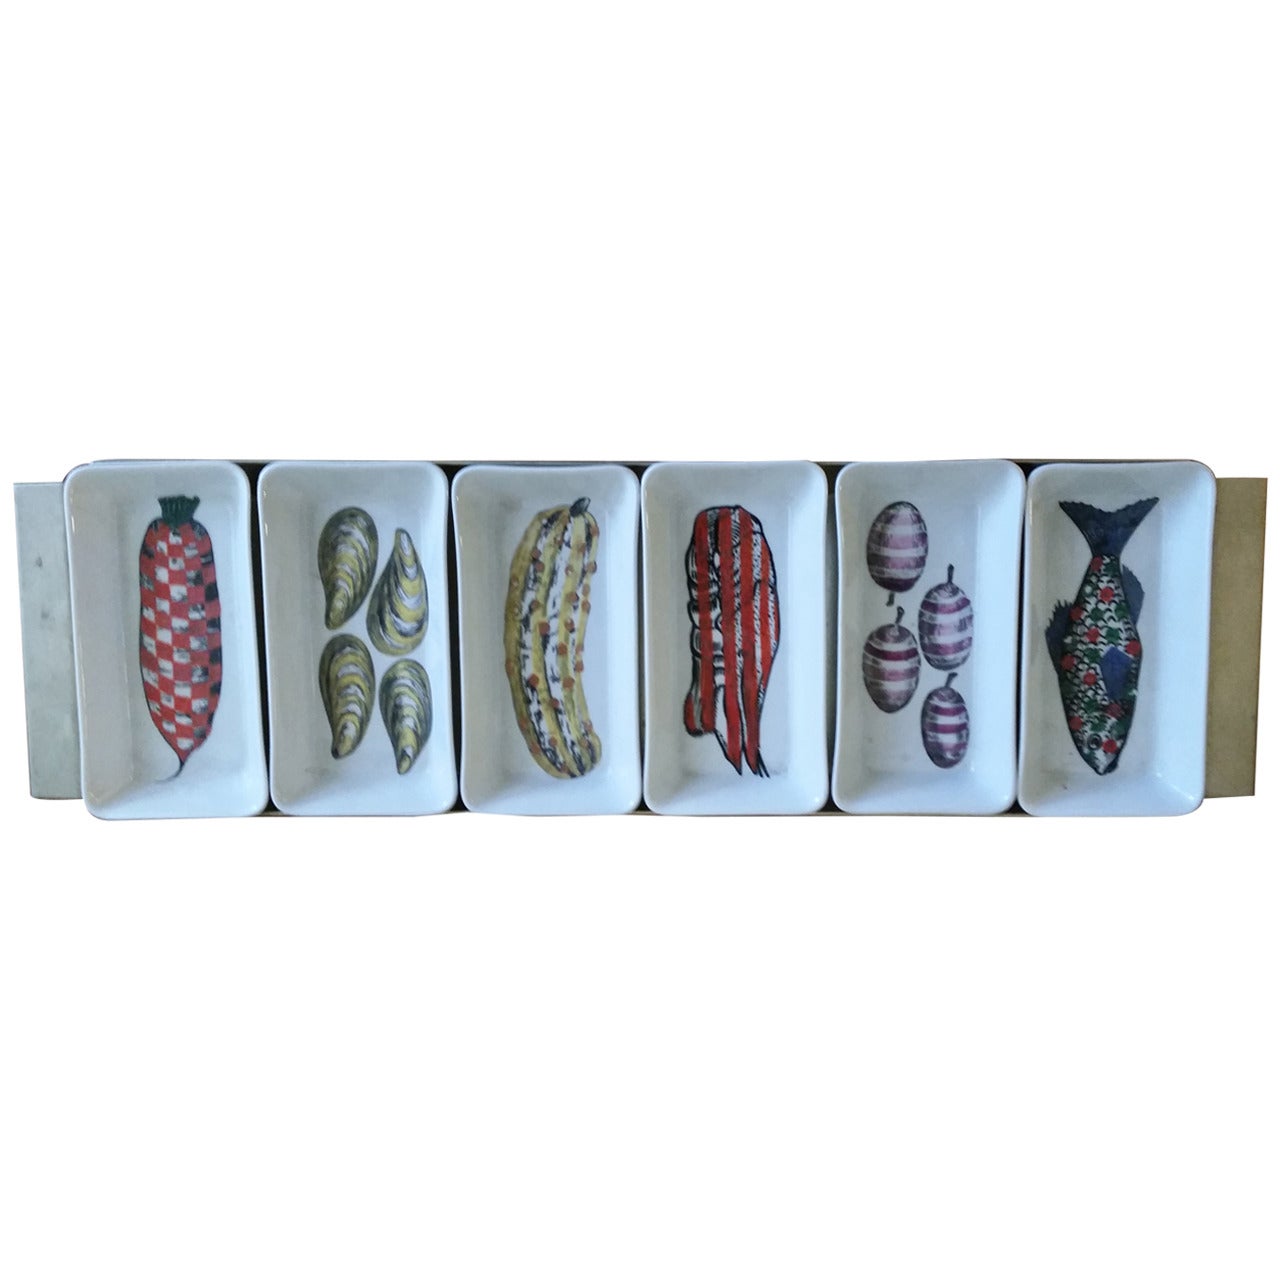 Piero Fornasetti Dishes Mounted in a Metal Serving Tray, Verdure Pesci Pattern